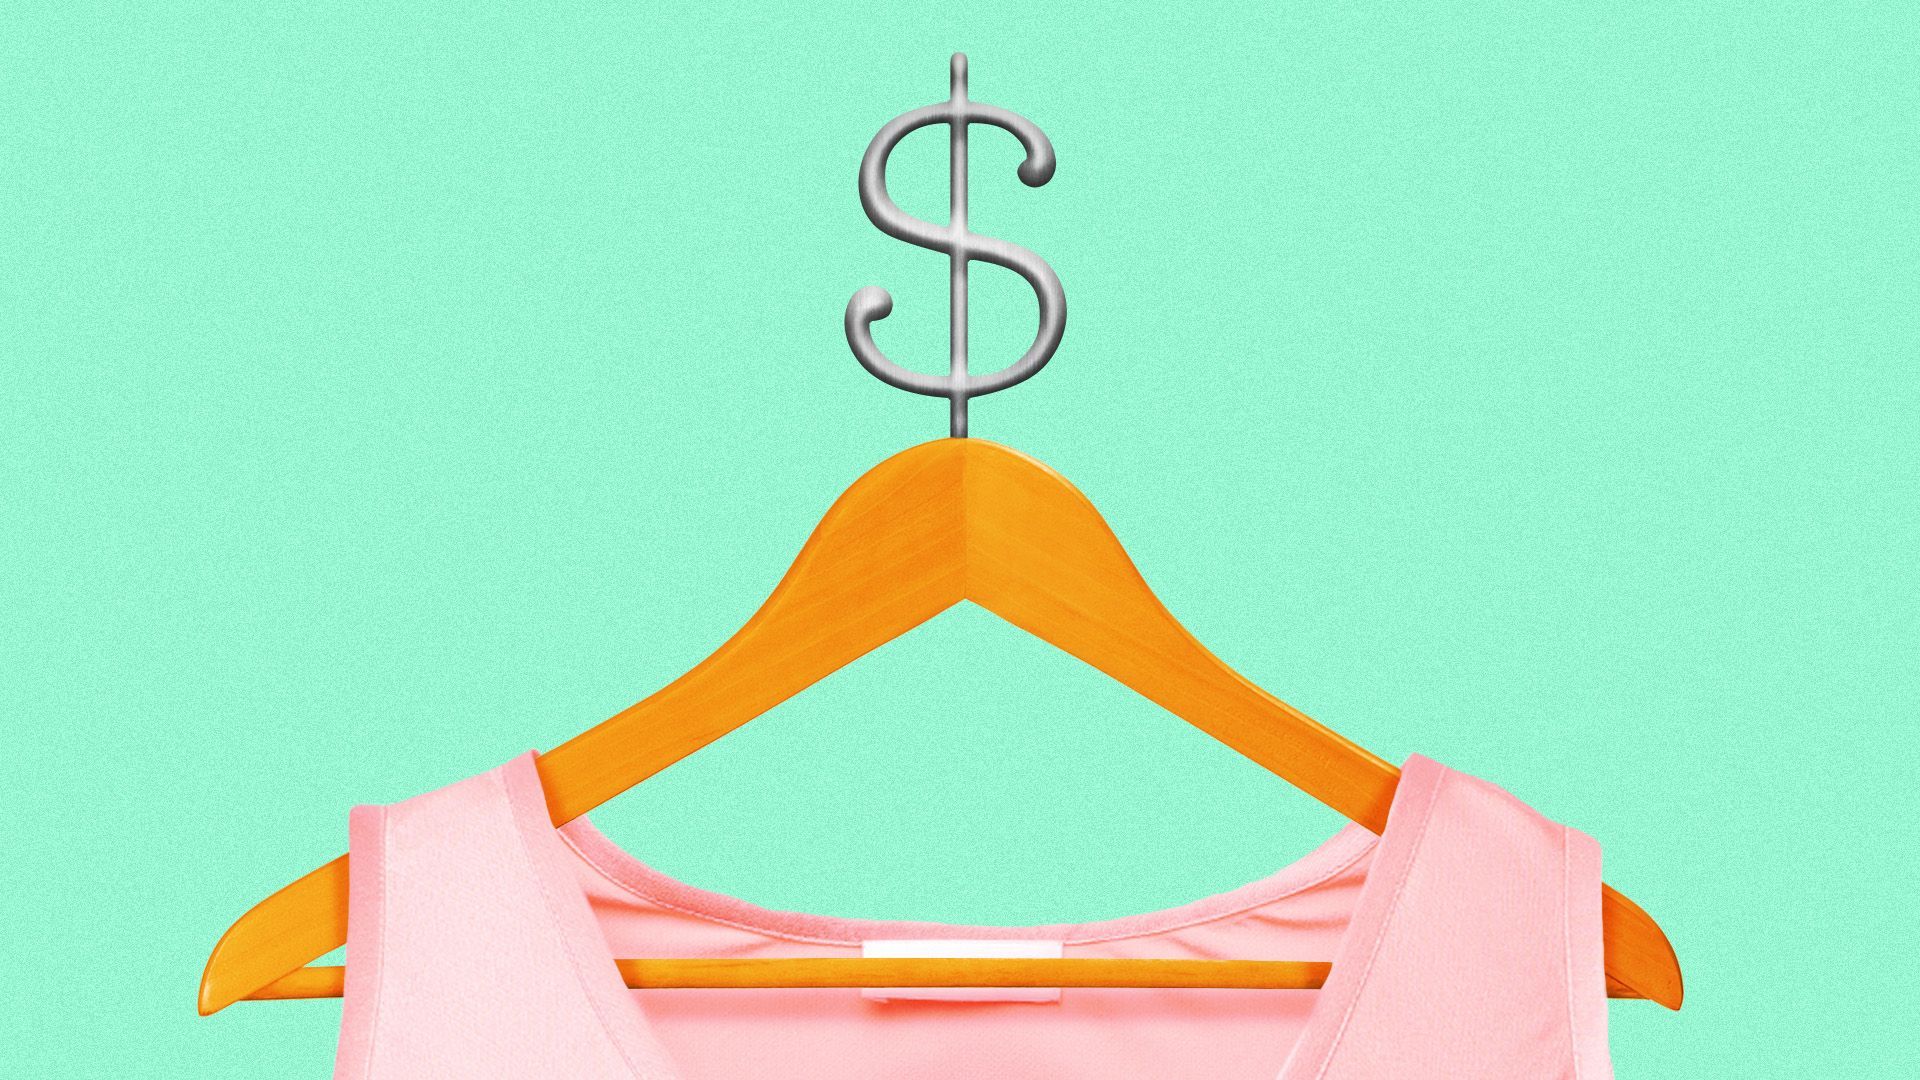 Illustration of a dress on a hanger with a dollar sign on top